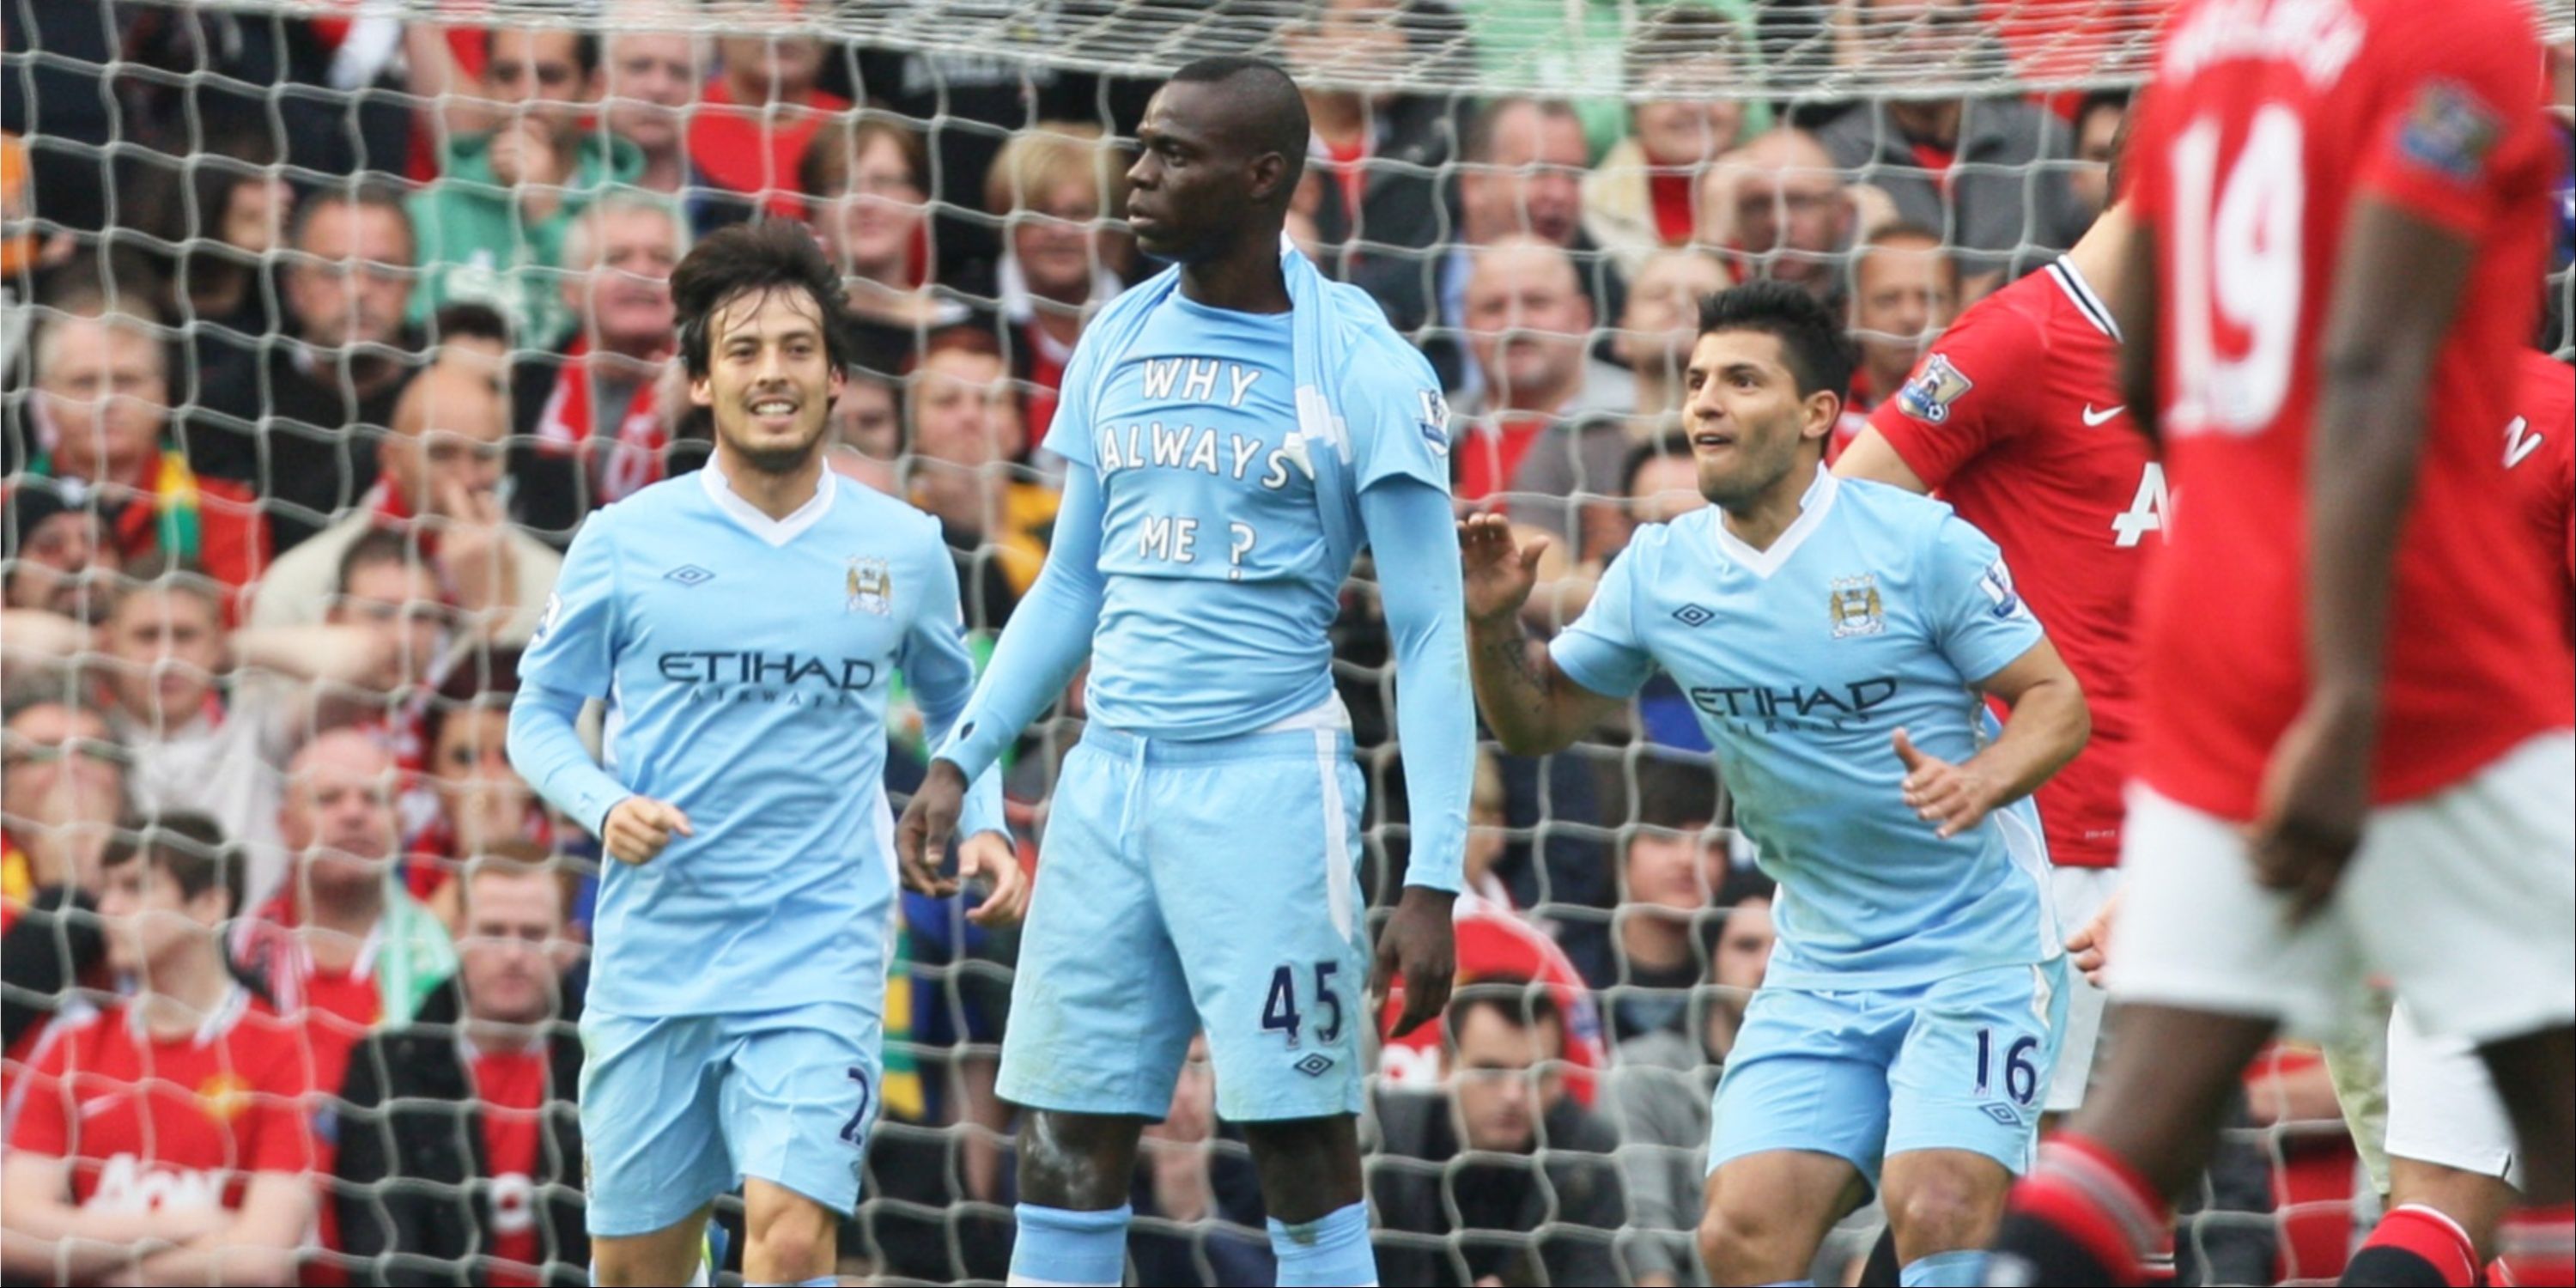 Manchester City's Mario Balotelli reveals a vest saying 'Why always me?' after scoring against Manchester United.